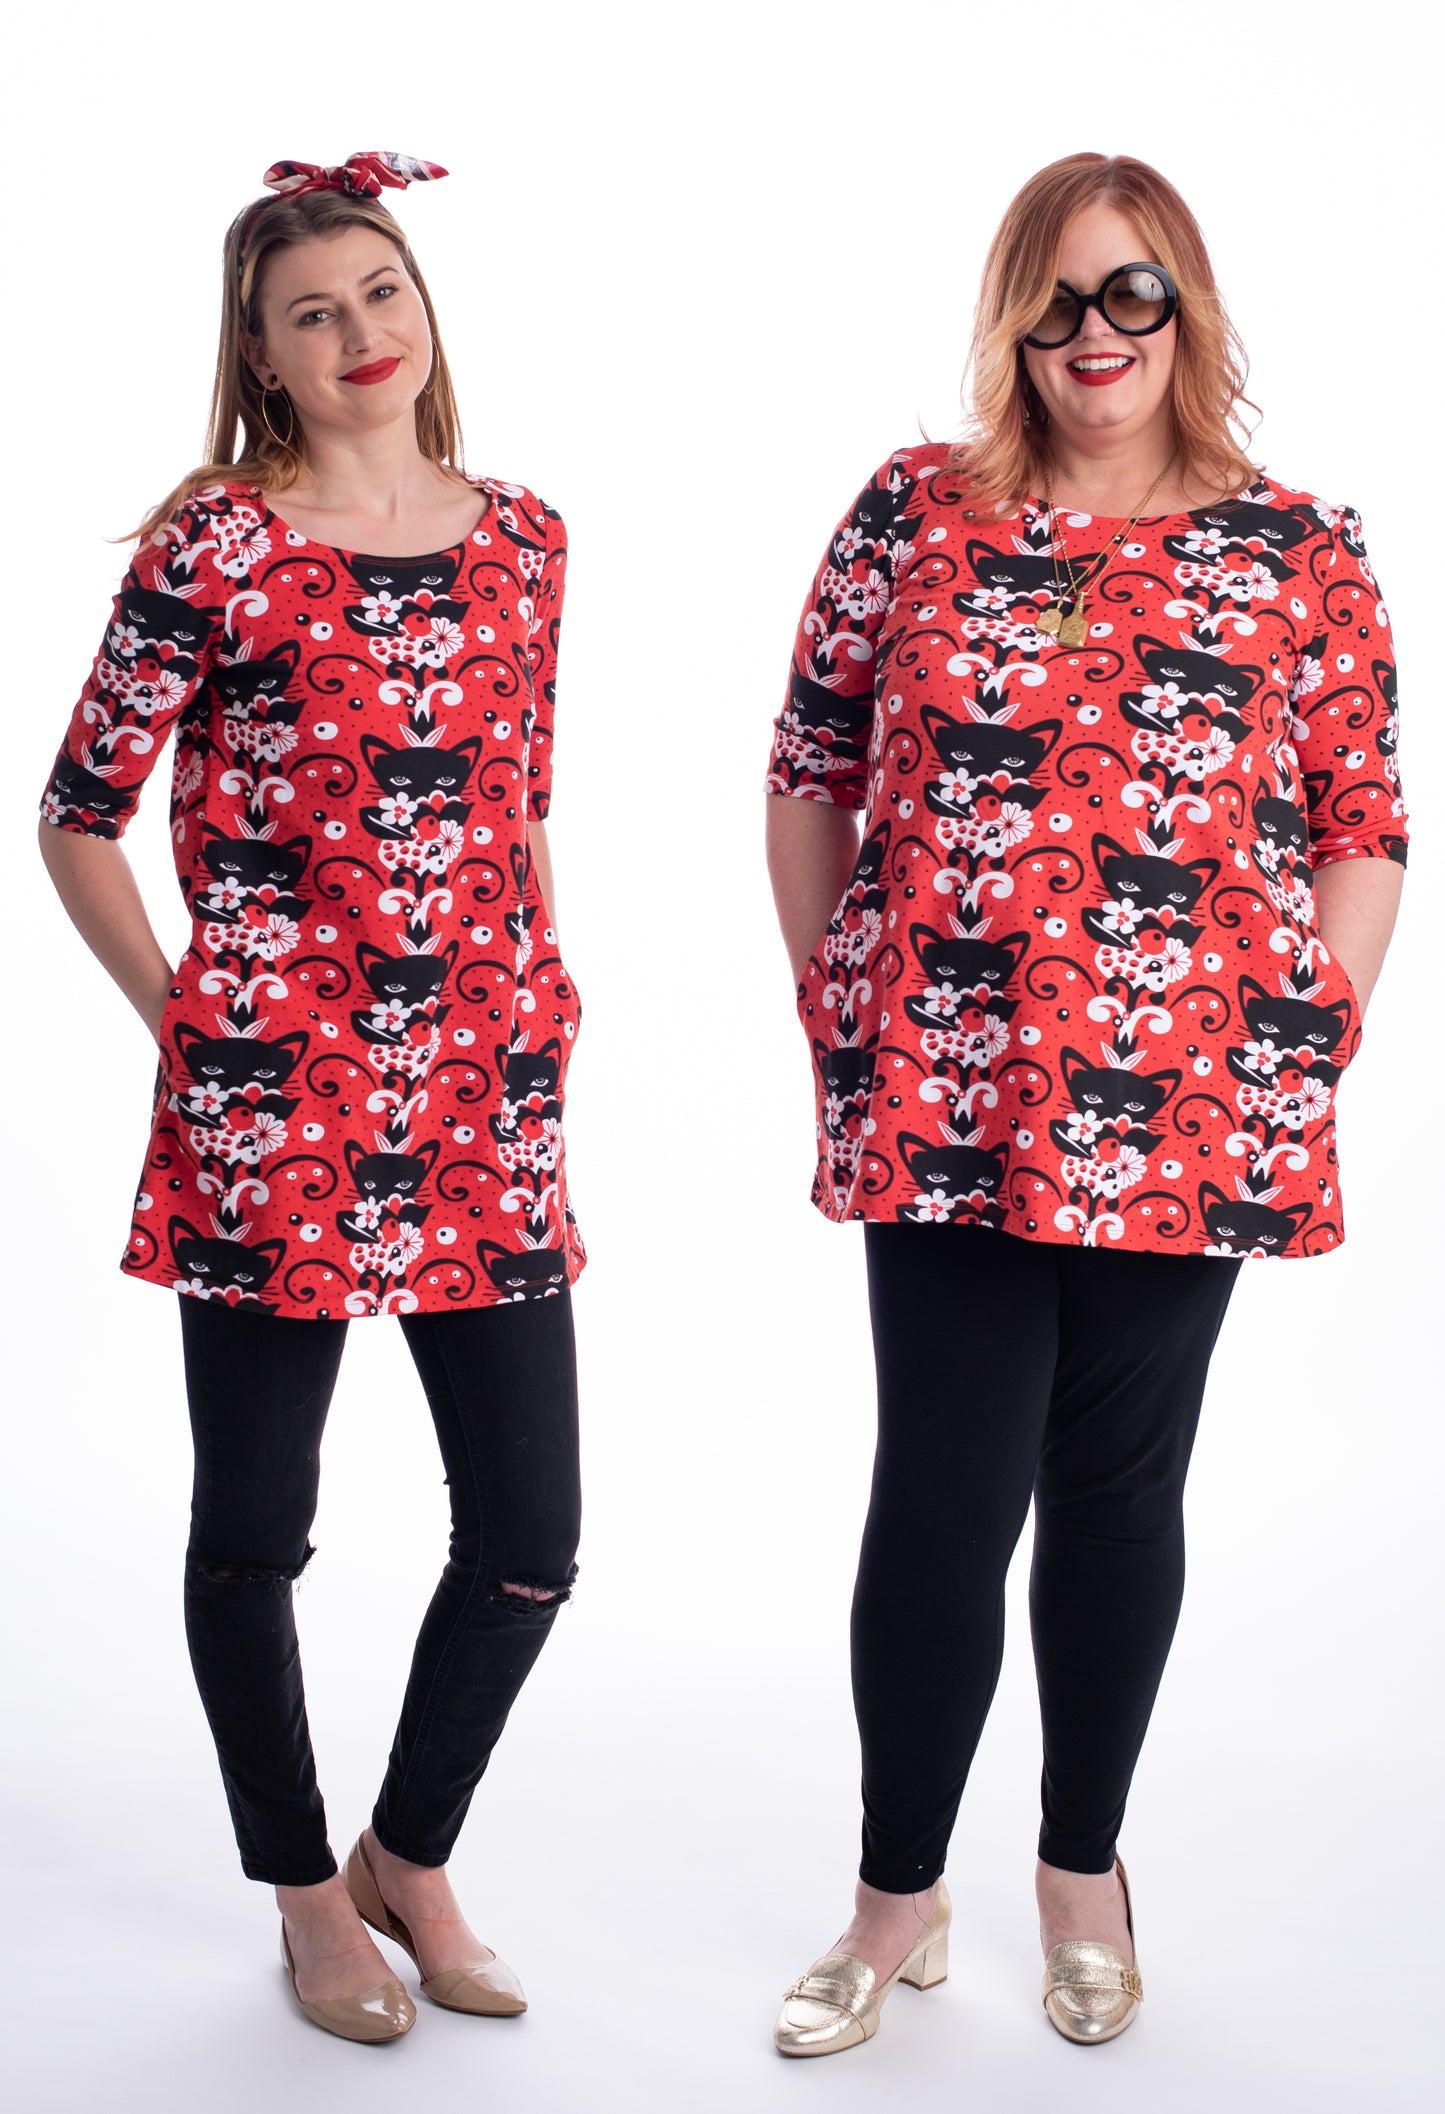 Red black and white a-line pocket tunic with  print of cats and flowers on 2 models